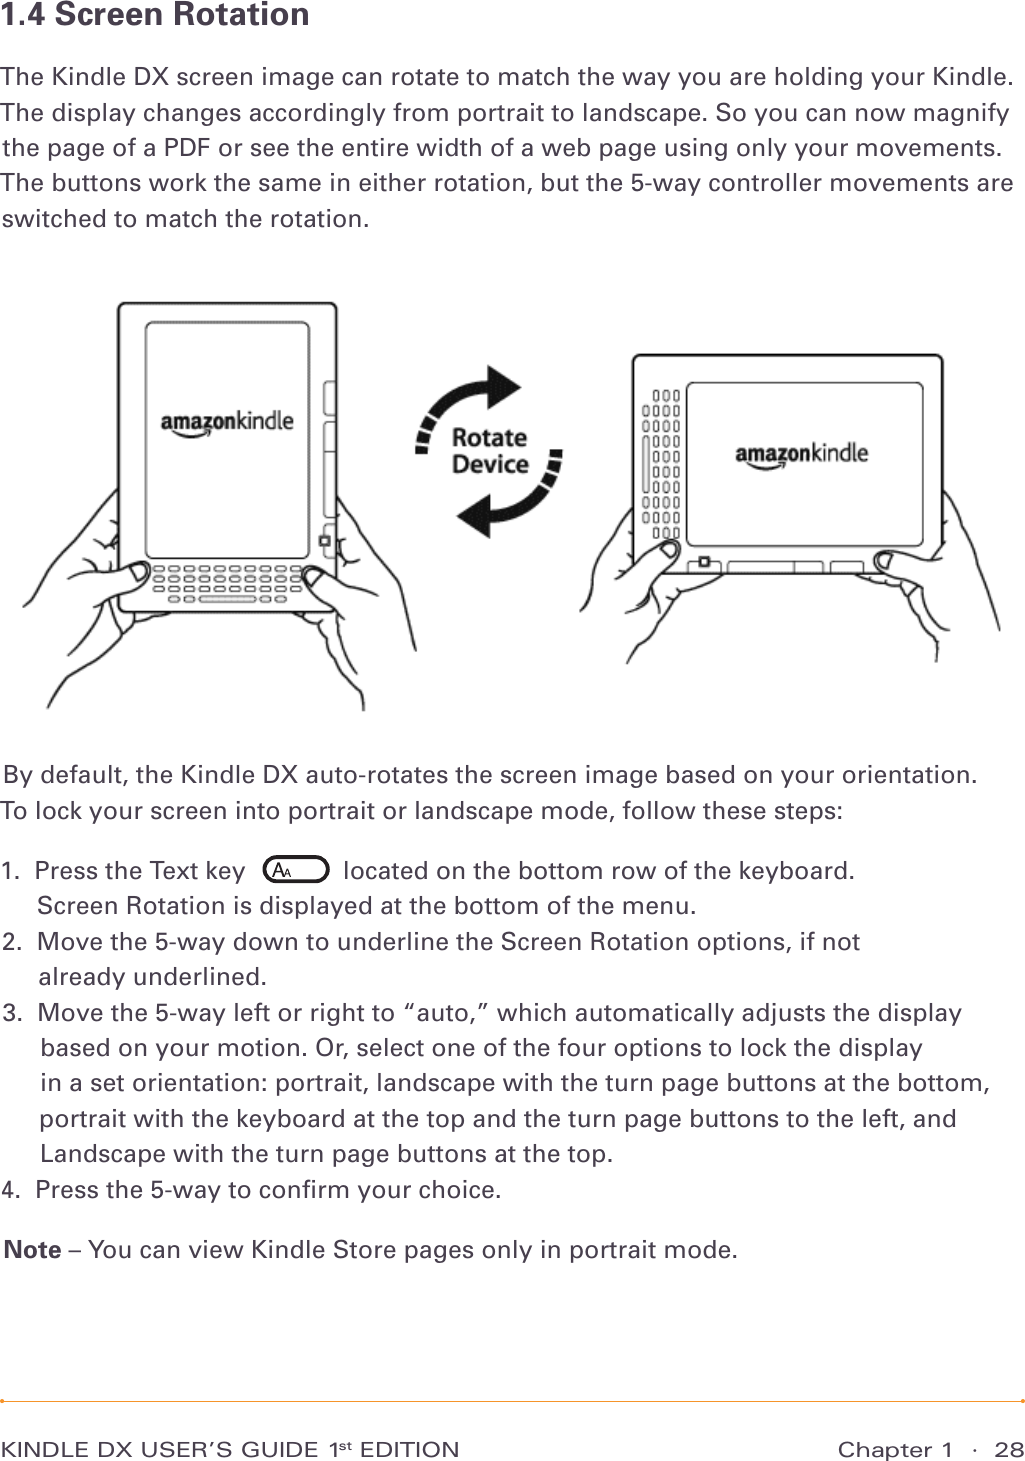 Chapter 1  ·  28KINDLE DX USER’S GUIDE 1st EDITION1.4 Screen RotationThe Kindle DX screen image can rotate to match the way you are holding your Kindle. The display changes accordingly from portrait to landscape. So you can now magnify the page of a PDF or see the entire width of a web page using only your movements. The buttons work the same in either rotation, but the 5-way controller movements are switched to match the rotation.By default, the Kindle DX auto-rotates the screen image based on your orientation.  To lock your screen into portrait or landscape mode, follow these steps:1.   Press the Text key       located on the bottom row of the keyboard. Screen Rotation is displayed at the bottom of the menu. 2.   Move the 5-way down to underline the Screen Rotation options, if not  already underlined. 3.   Move the 5-way left or right to “auto,” which automatically adjusts the display based on your motion. Or, select one of the four options to lock the display  in a set orientation: portrait, landscape with the turn page buttons at the bottom, portrait with the keyboard at the top and the turn page buttons to the left, and Landscape with the turn page buttons at the top.4.   Press the 5-way to conﬁrm your choice. Note – You can view Kindle Store pages only in portrait mode.